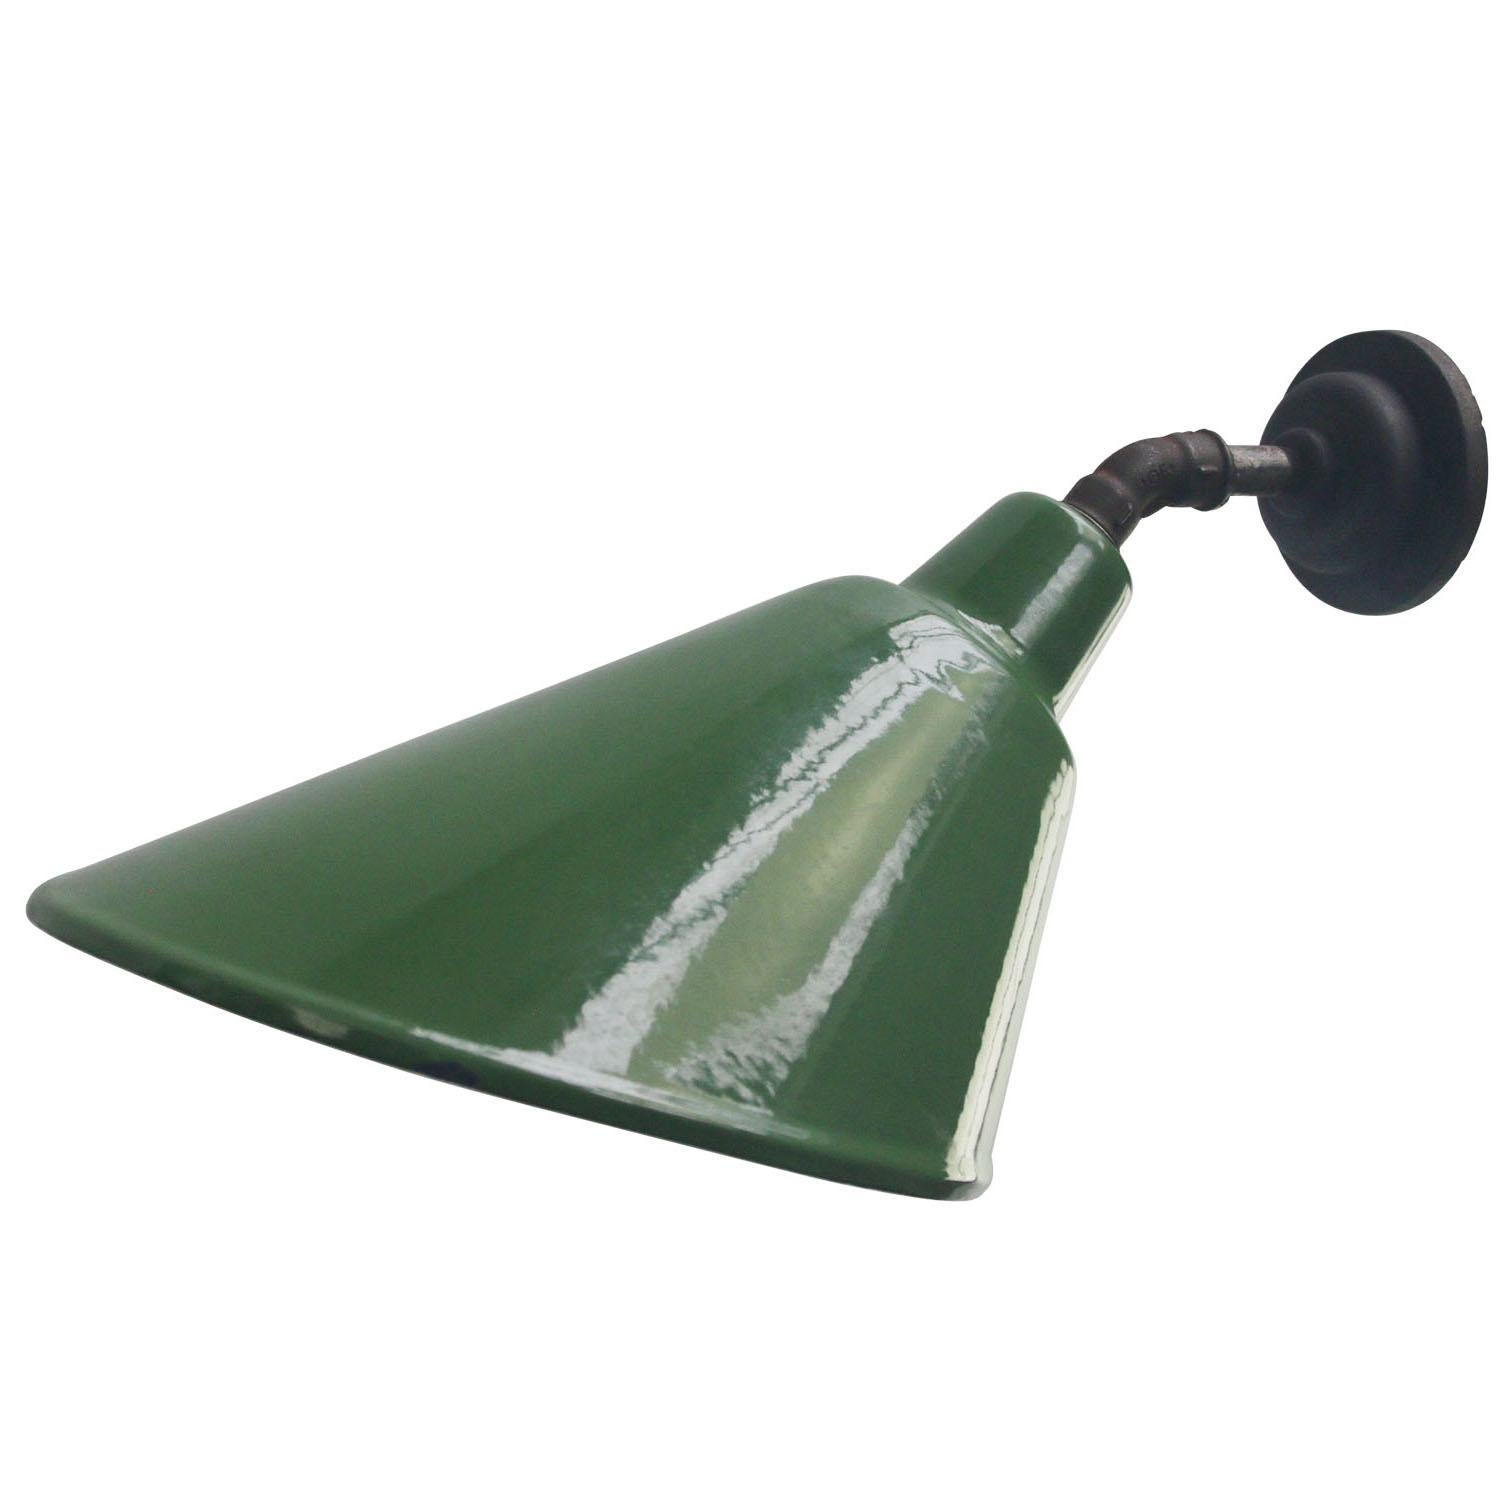 Factory wall light
Green enamel, white interior

Diameter cast iron wall piece: 10.5 cm / 4”.
2 holes to secure

Weight: 2.00 kg / 4.4 lb

Priced per individual item. All lamps have been made suitable by international standards for incandescent